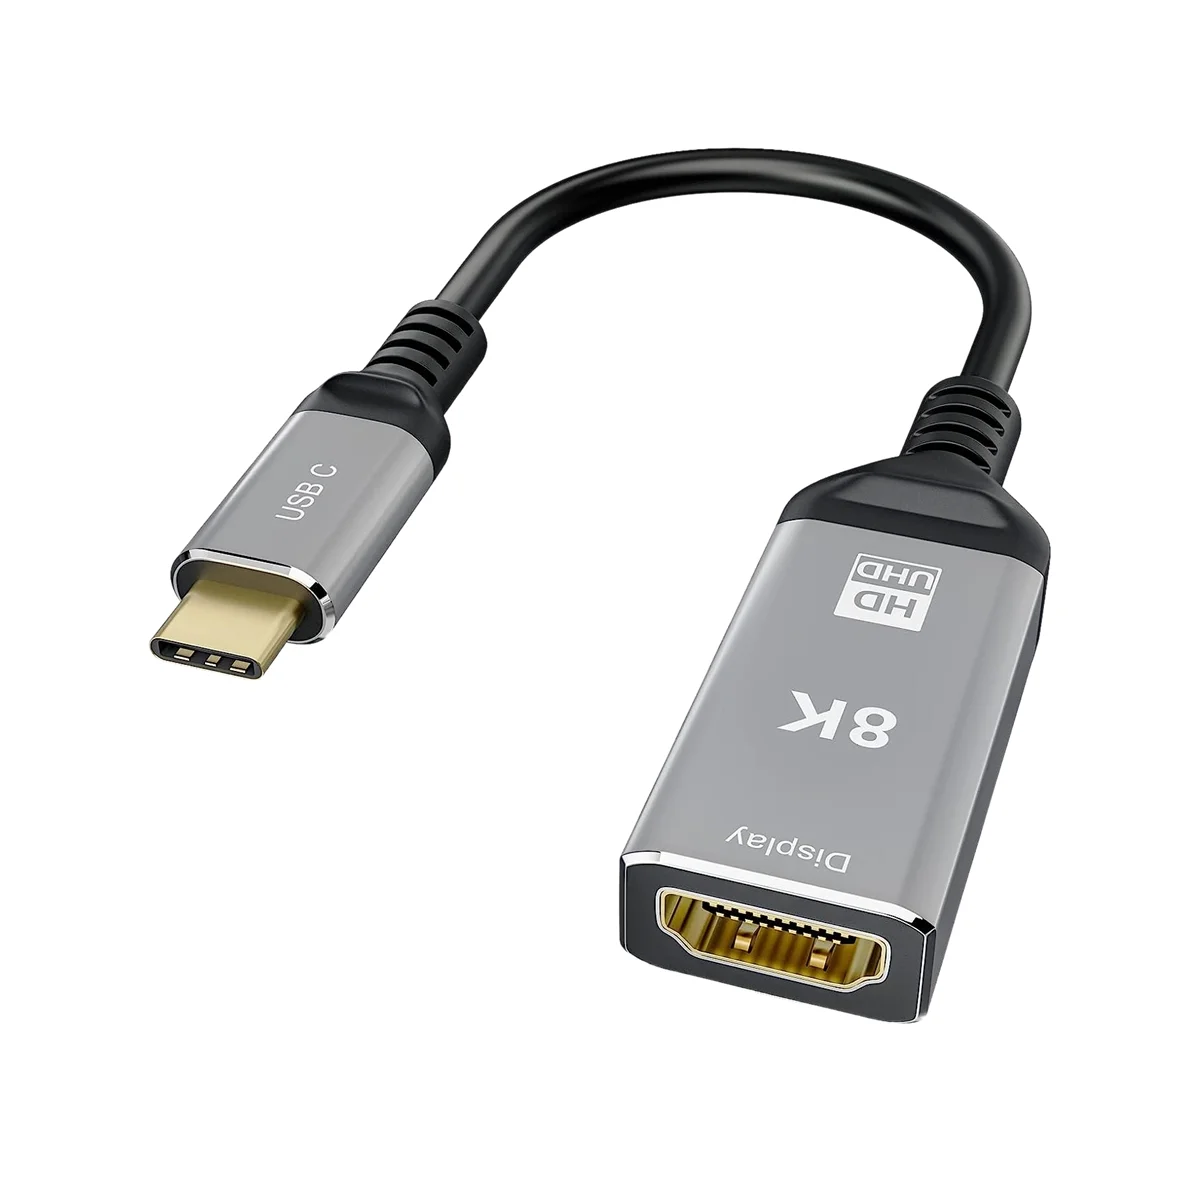 

USB C to HDMI-Compatible Adapter 4K 120HZ,8K 60HZ USB Type C to HDMI-Compatible 2.1 Adapter Support 48Gbps Transfer Rate